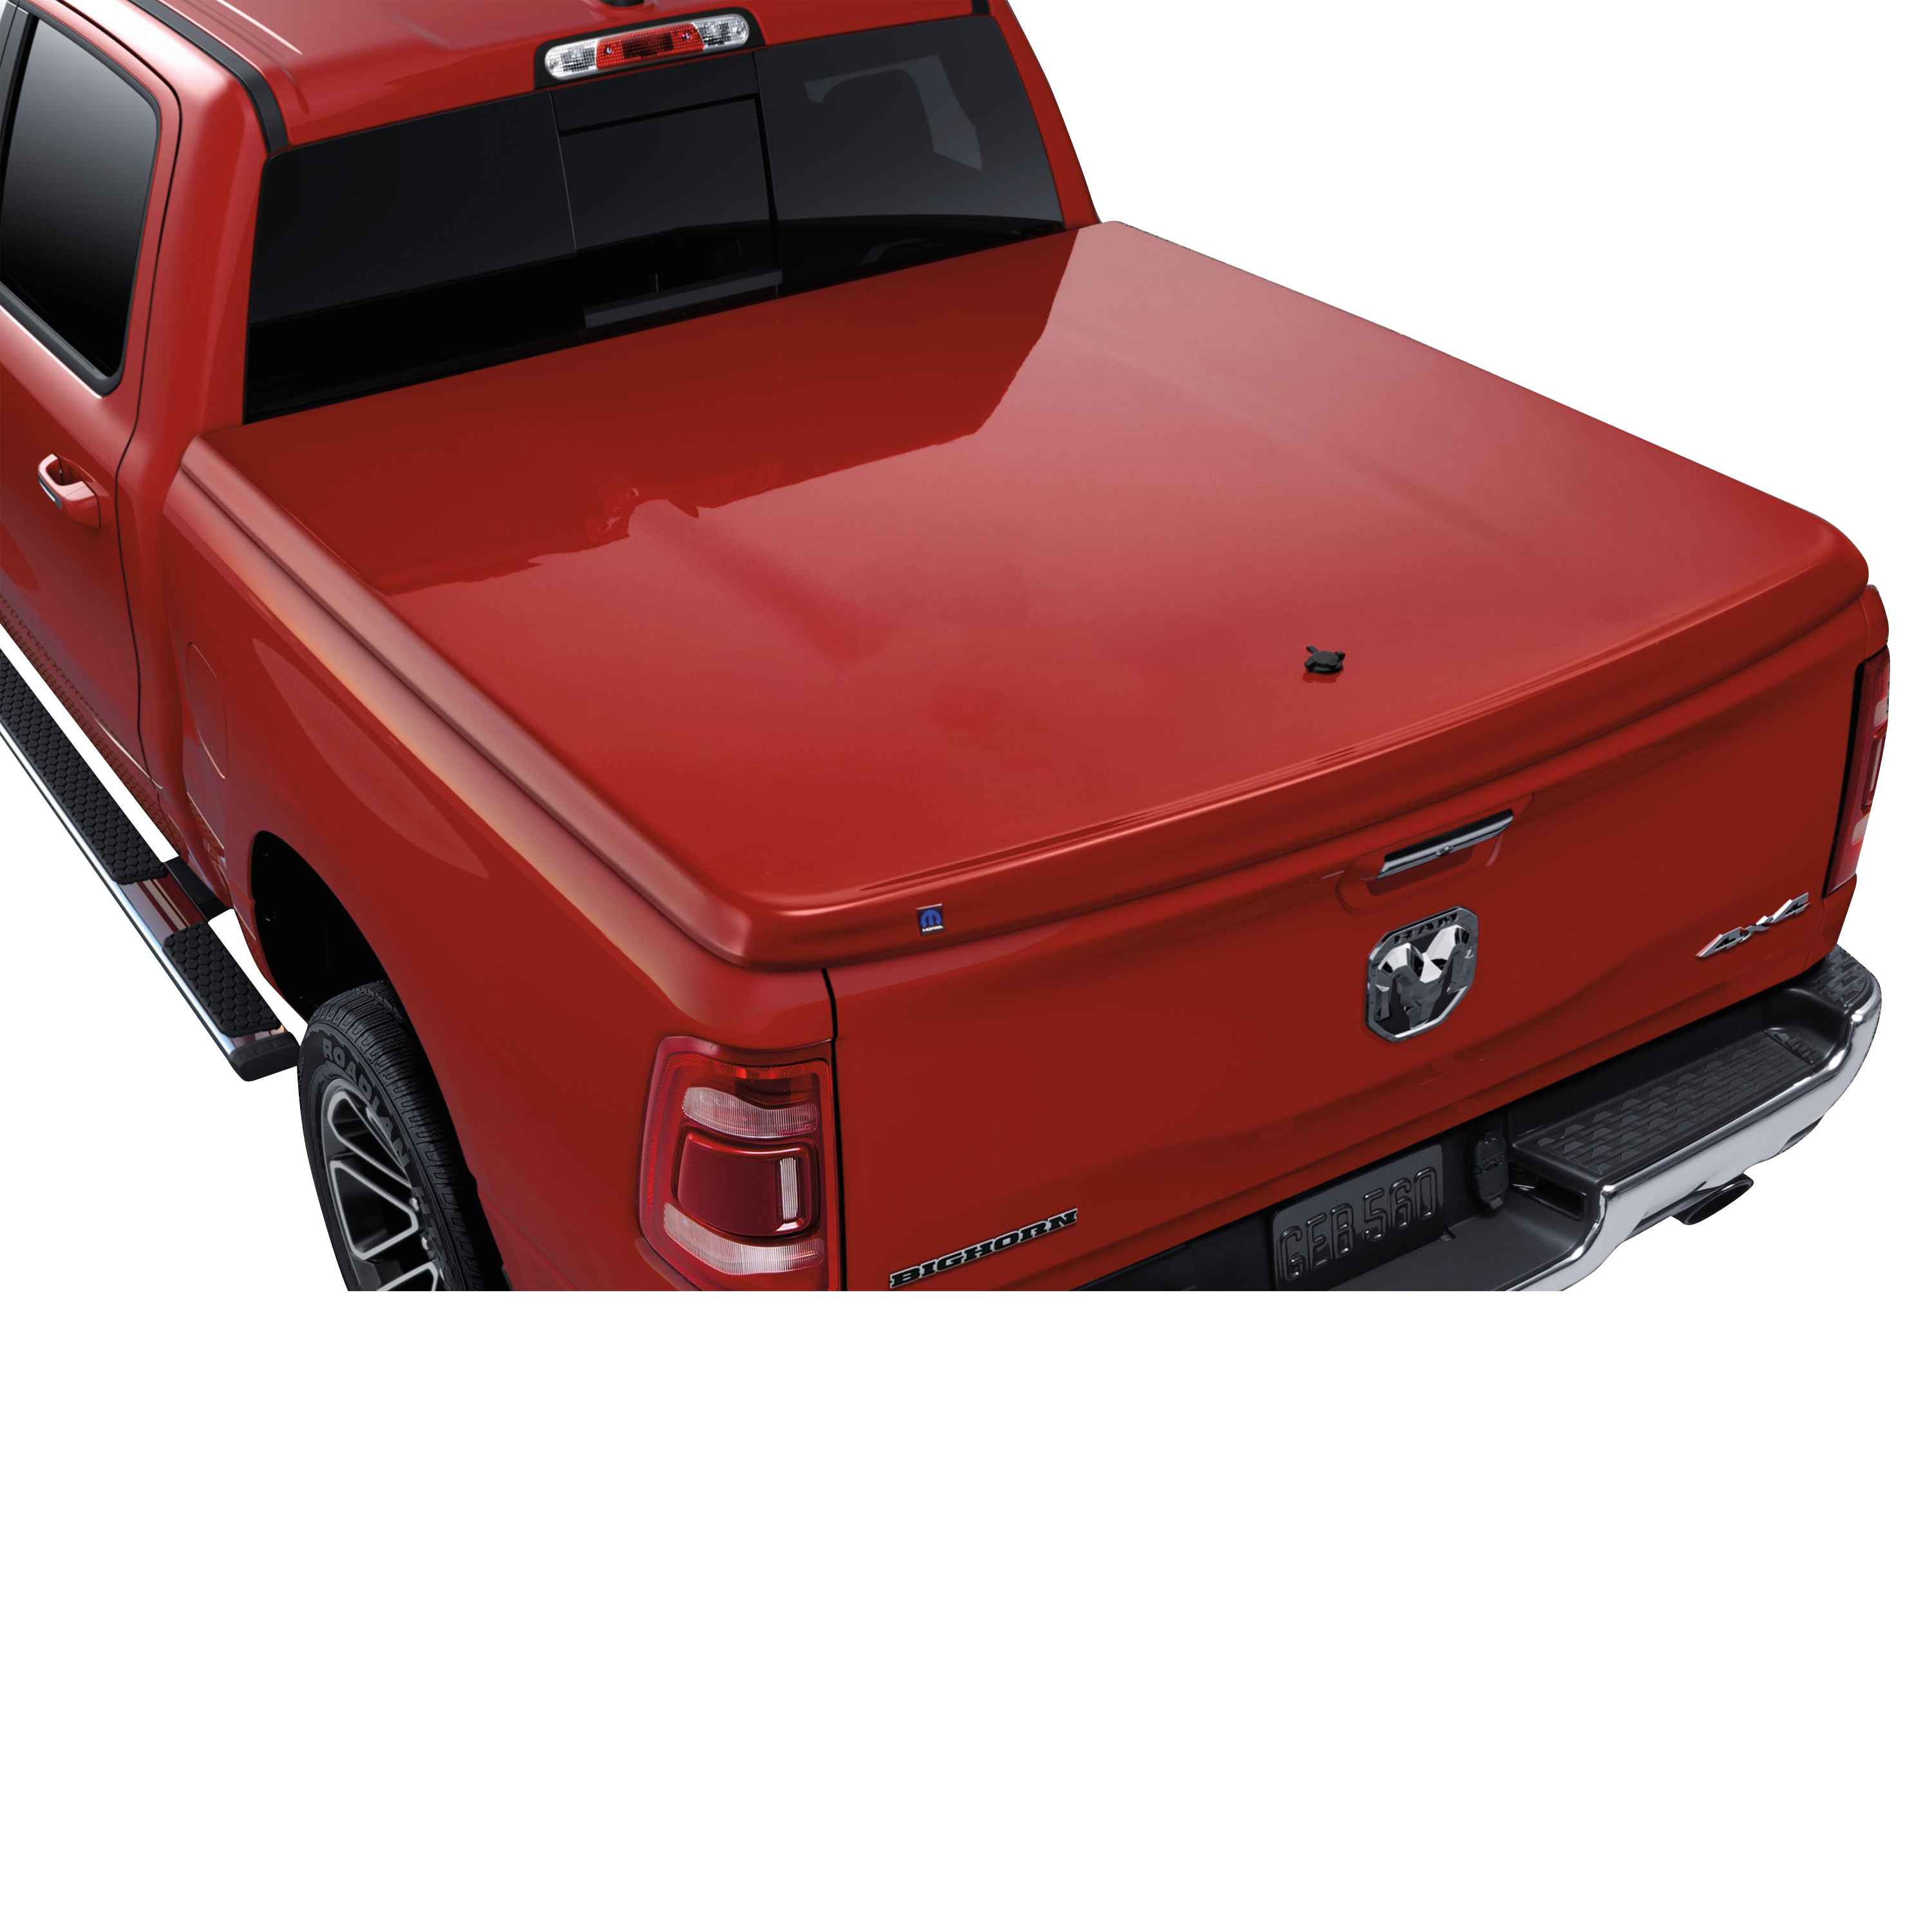 OEM 2019 Ram 1500 One-Piece Tonneau Cover in Body Color for 6 4 Conventional Bed - Delmonico Red (Part #82215241AB)